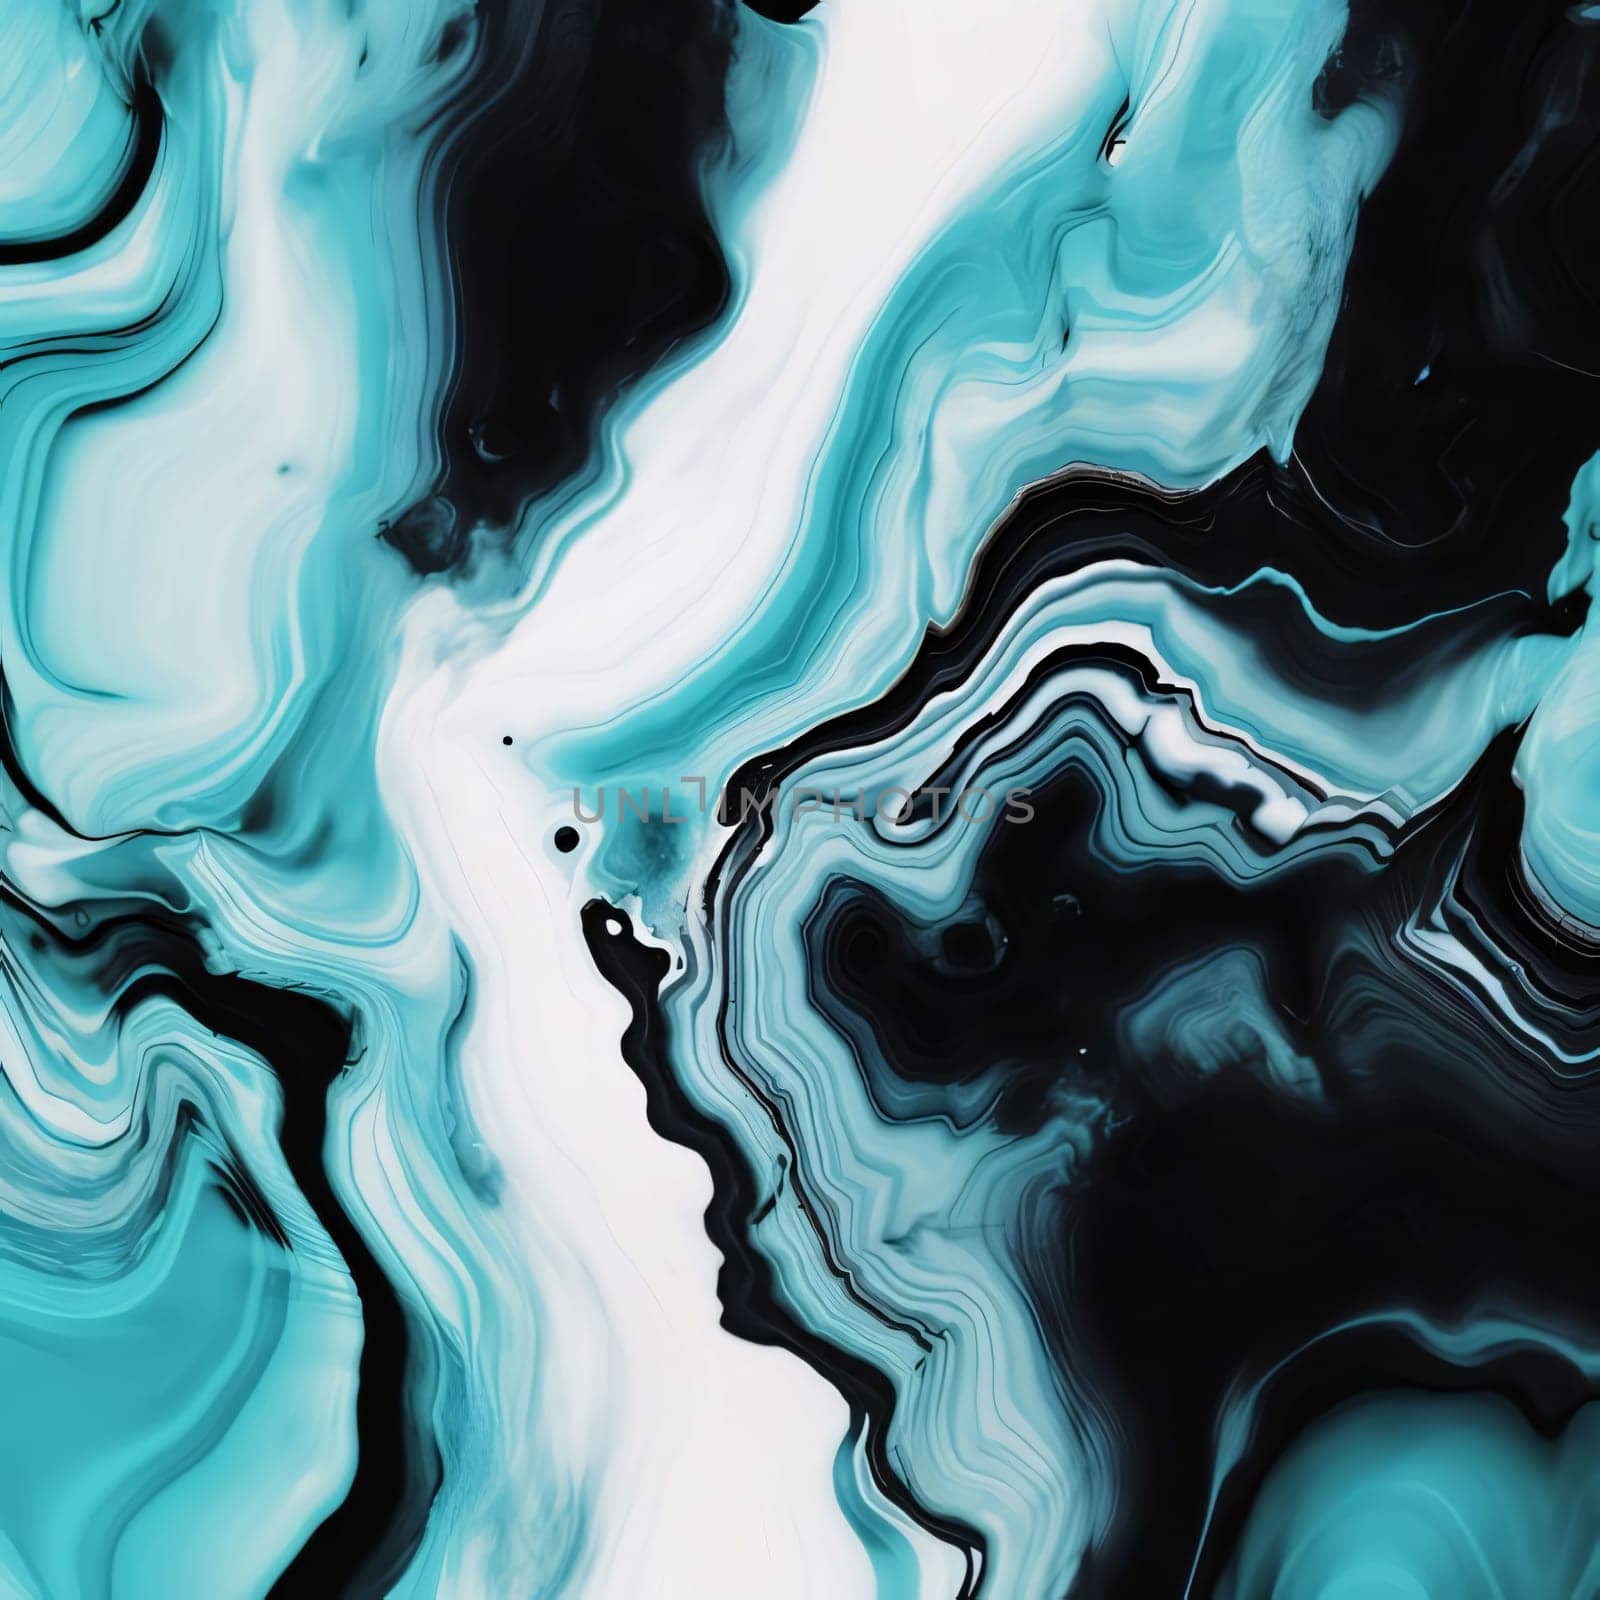 Abstract background design: abstract background with blue and black marble pattern, digitally generated image